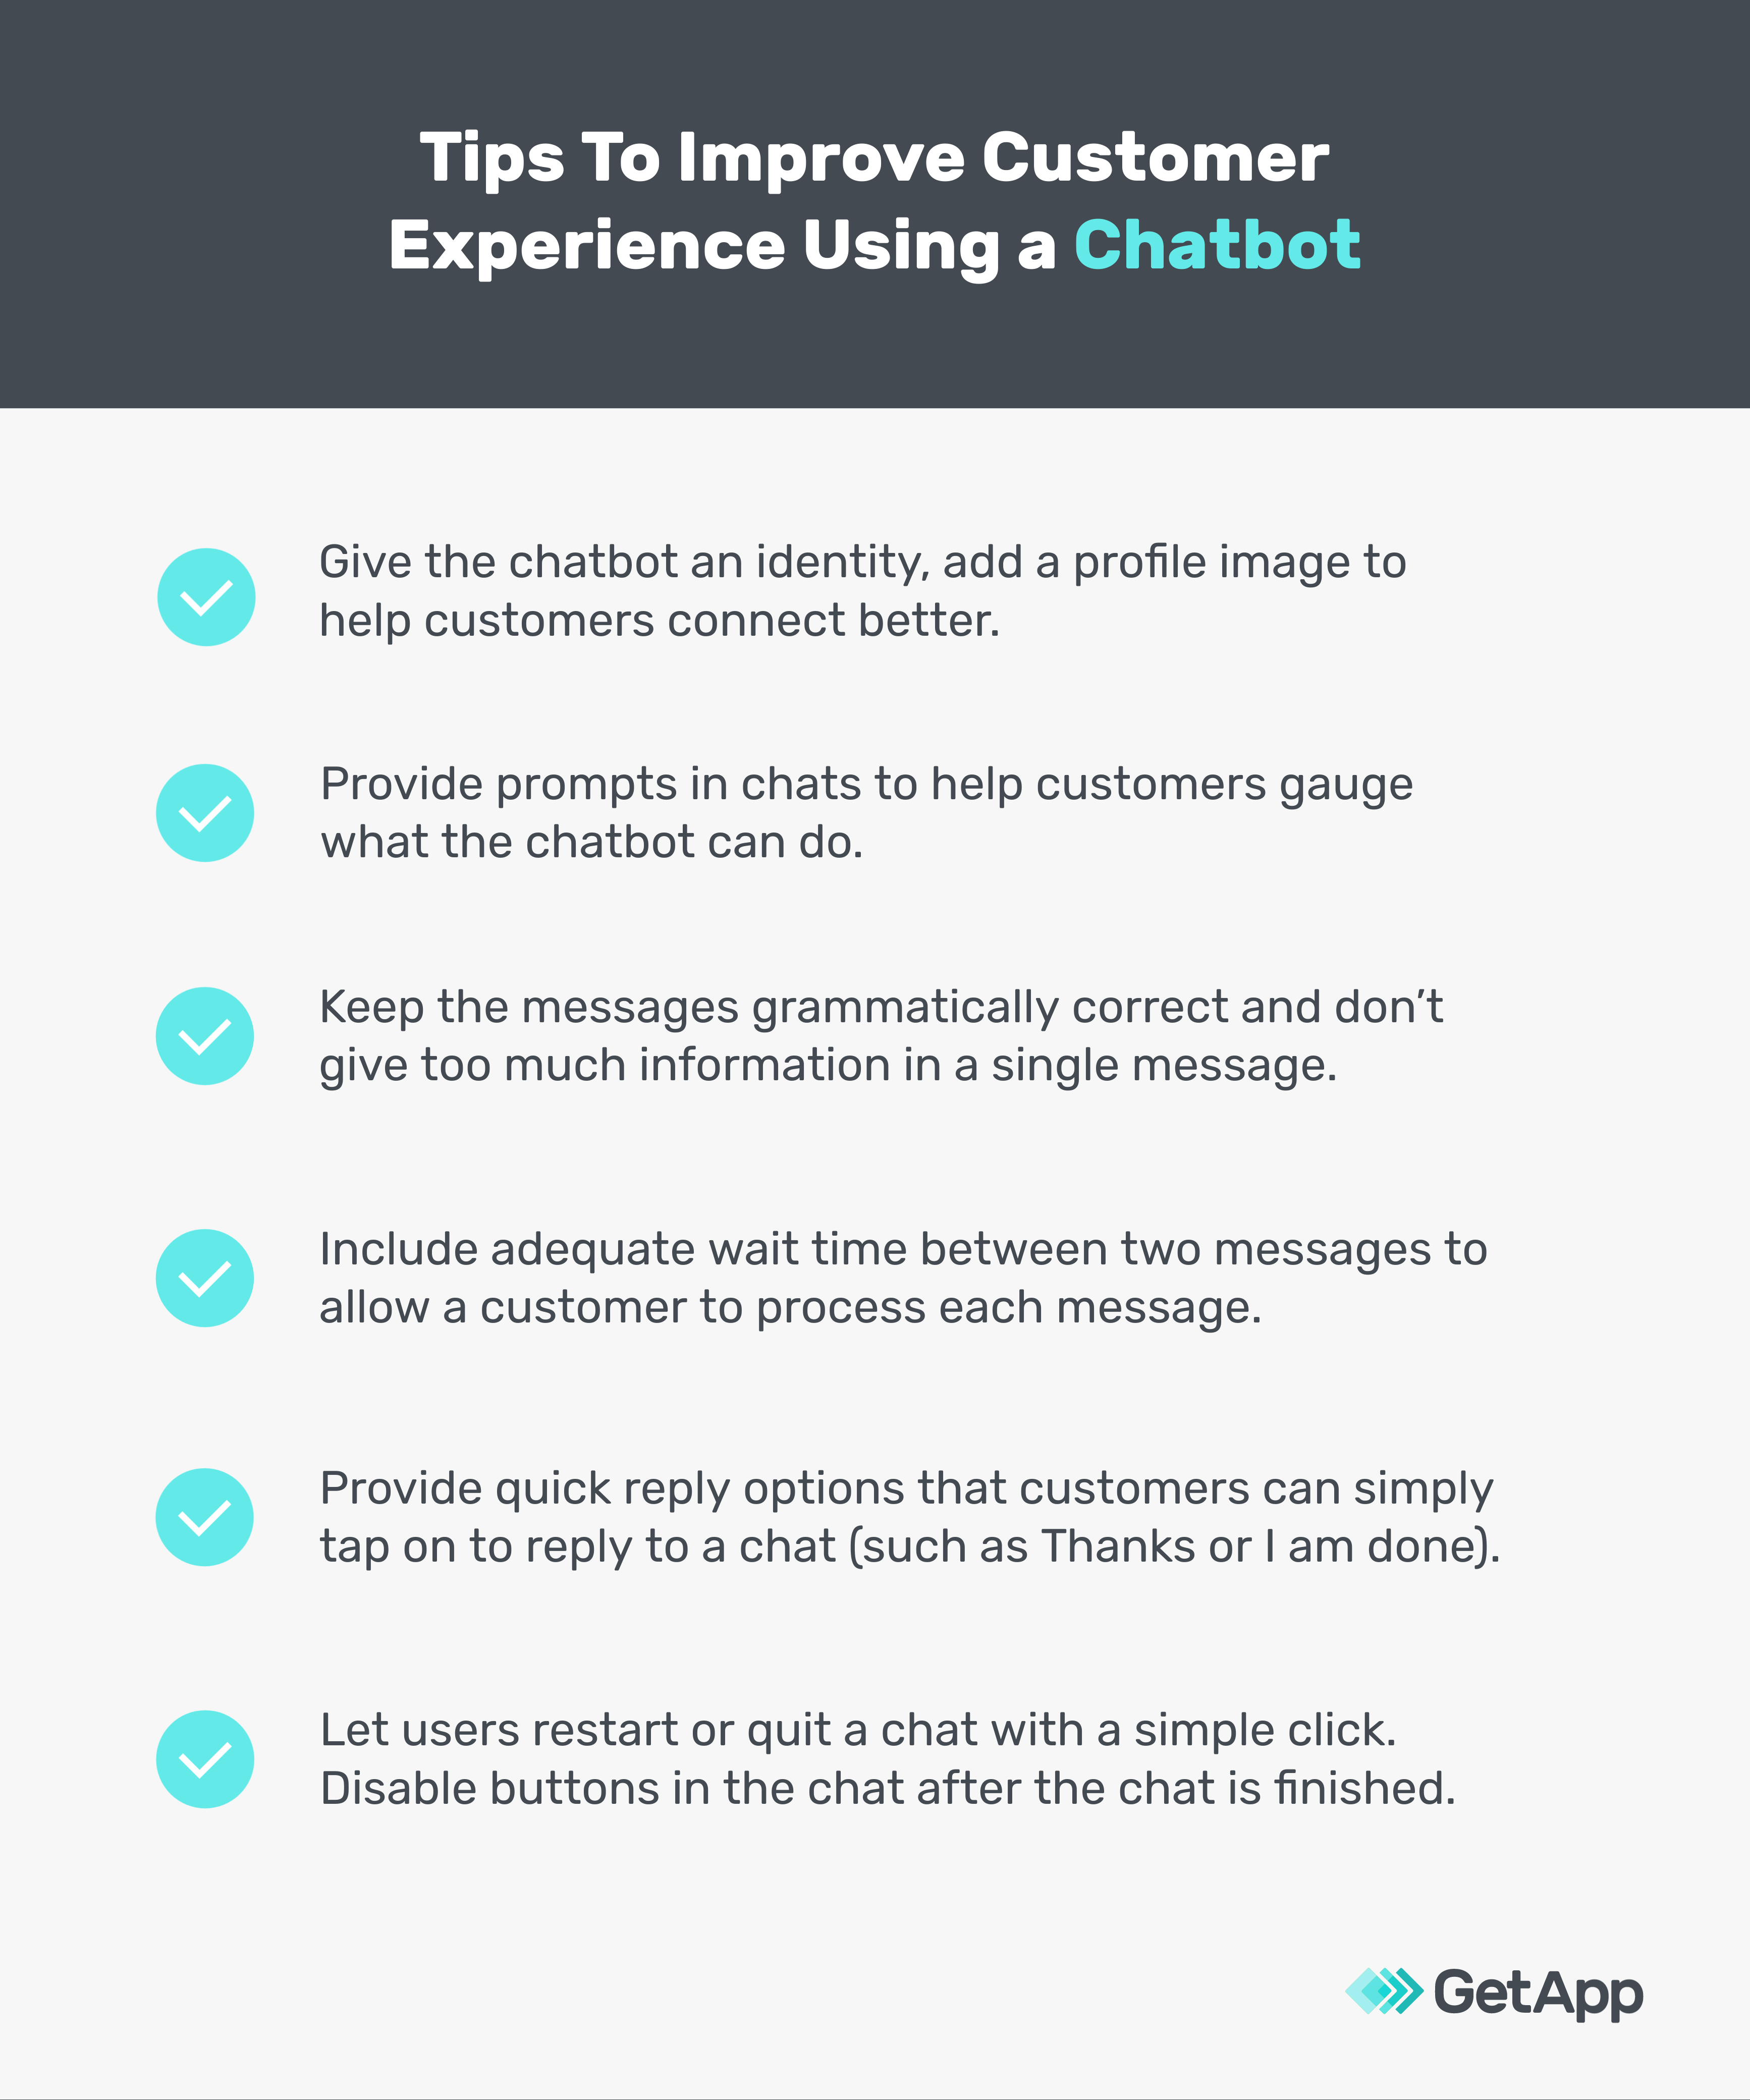 Tips-to-improve-customer-experience-with-chatbot